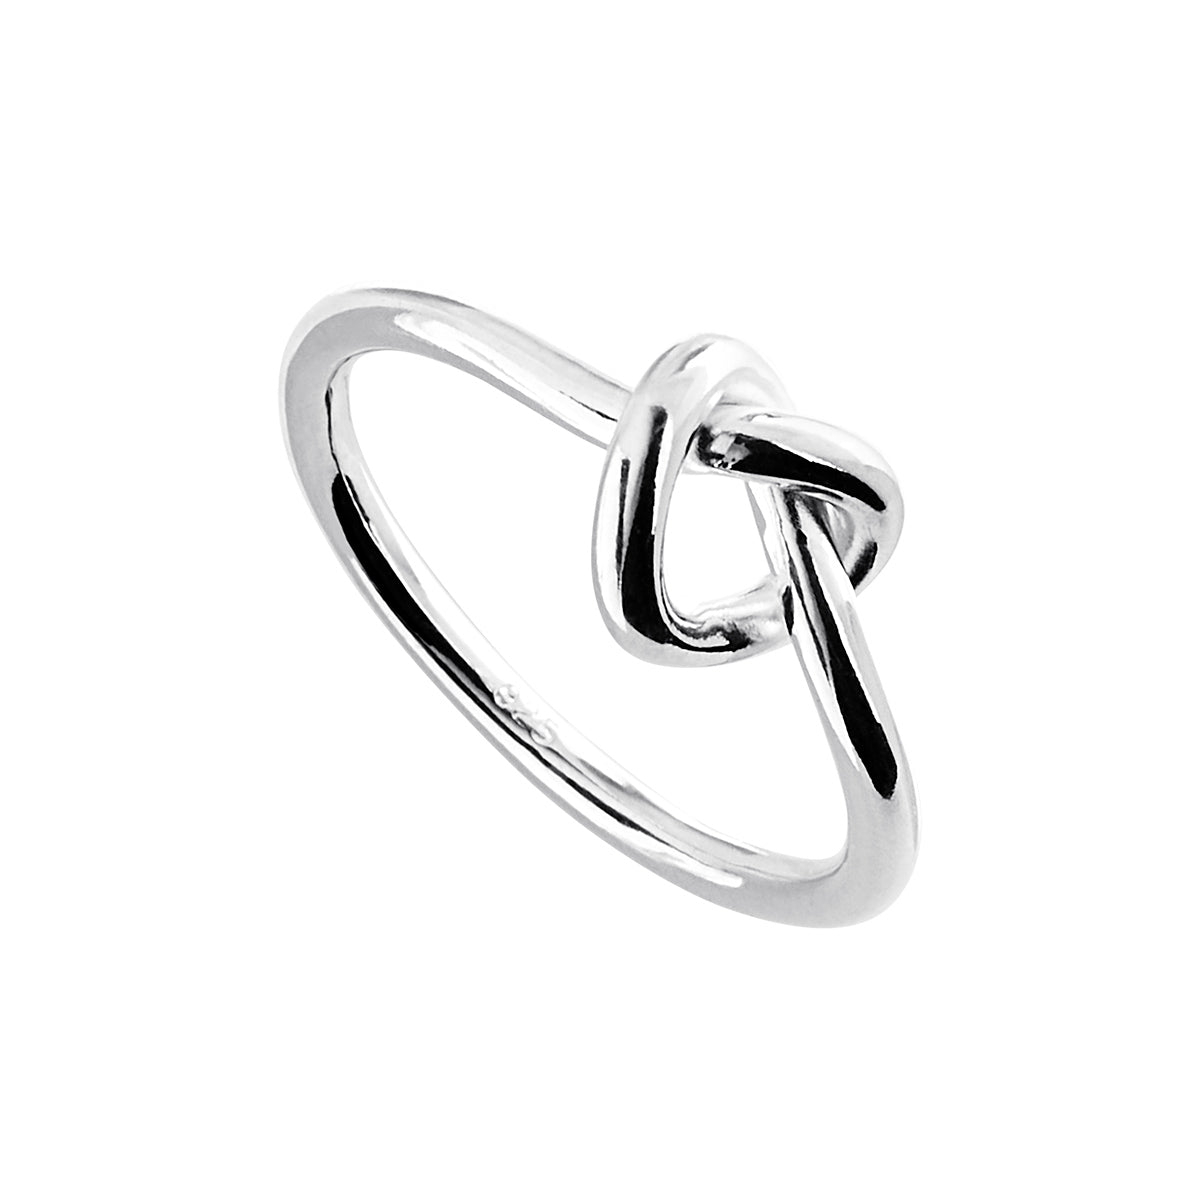 Silver wire knott ring